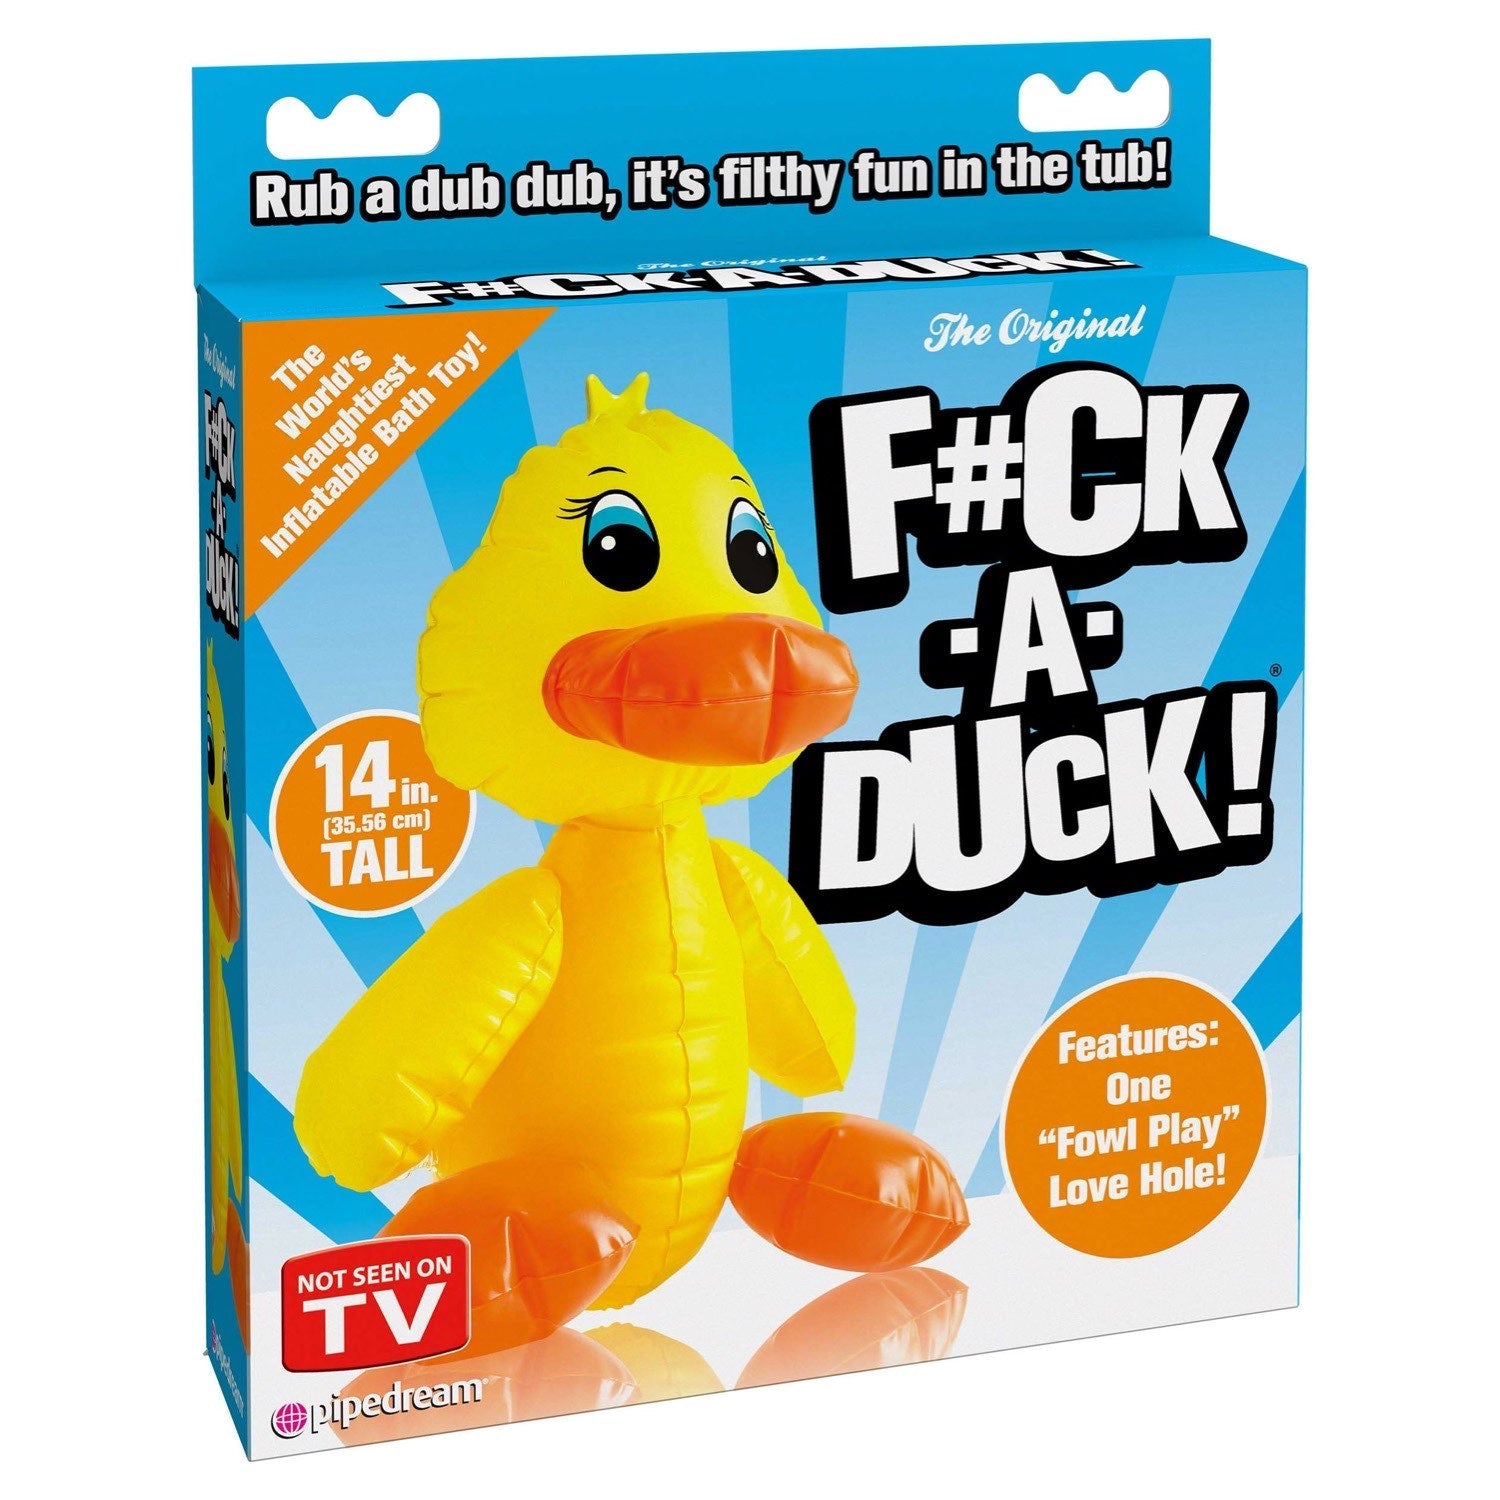  F#ck-A-Duck - Inflatable Duck by Pipedream